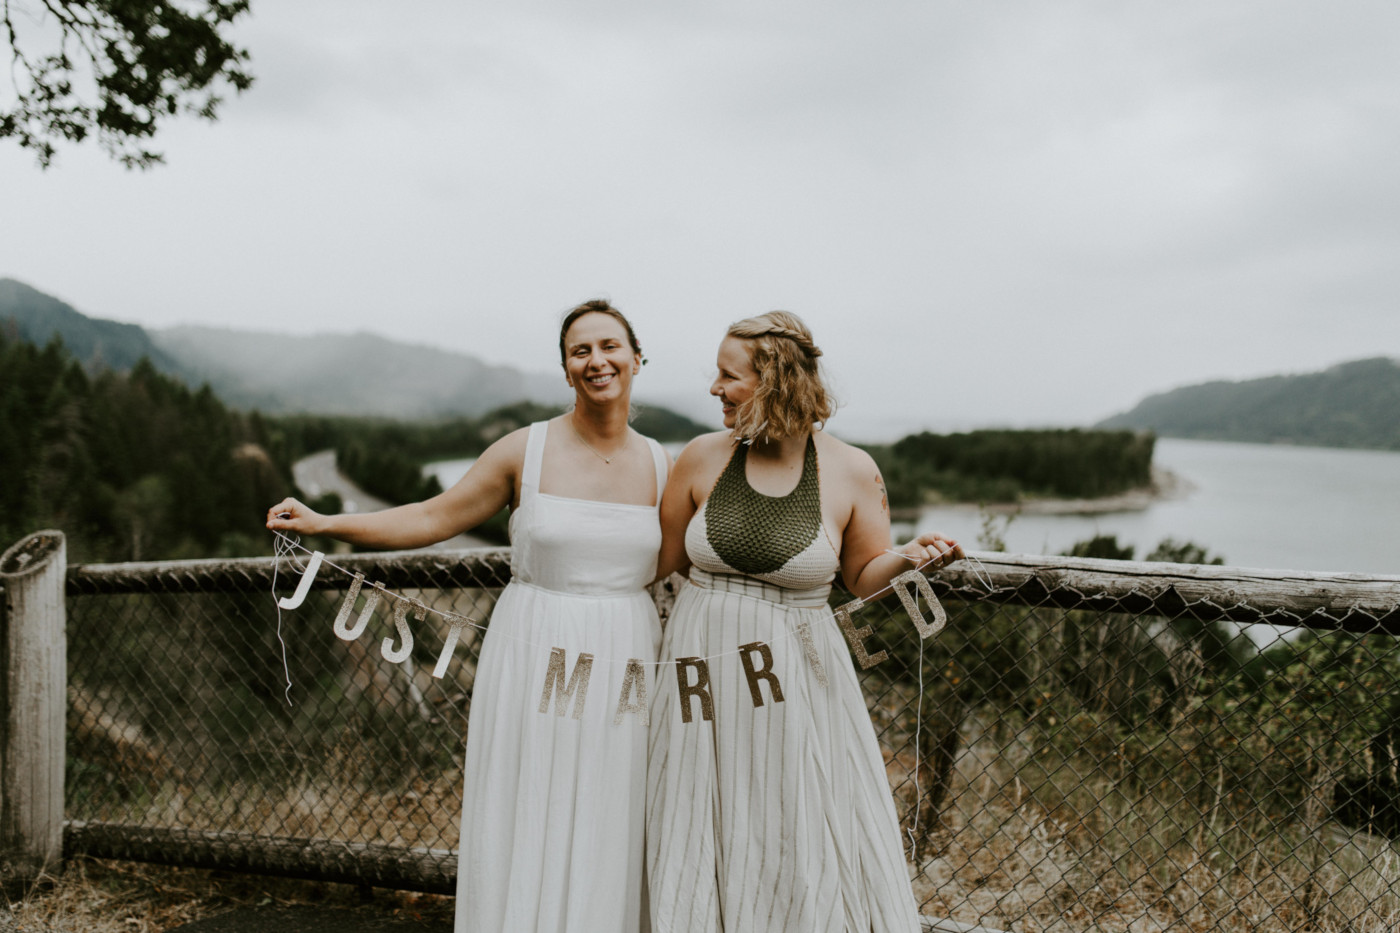 Kate and Audrey hold up their just married banner. Elopement wedding photography at Bridal Veil Falls by Sienna Plus Josh.